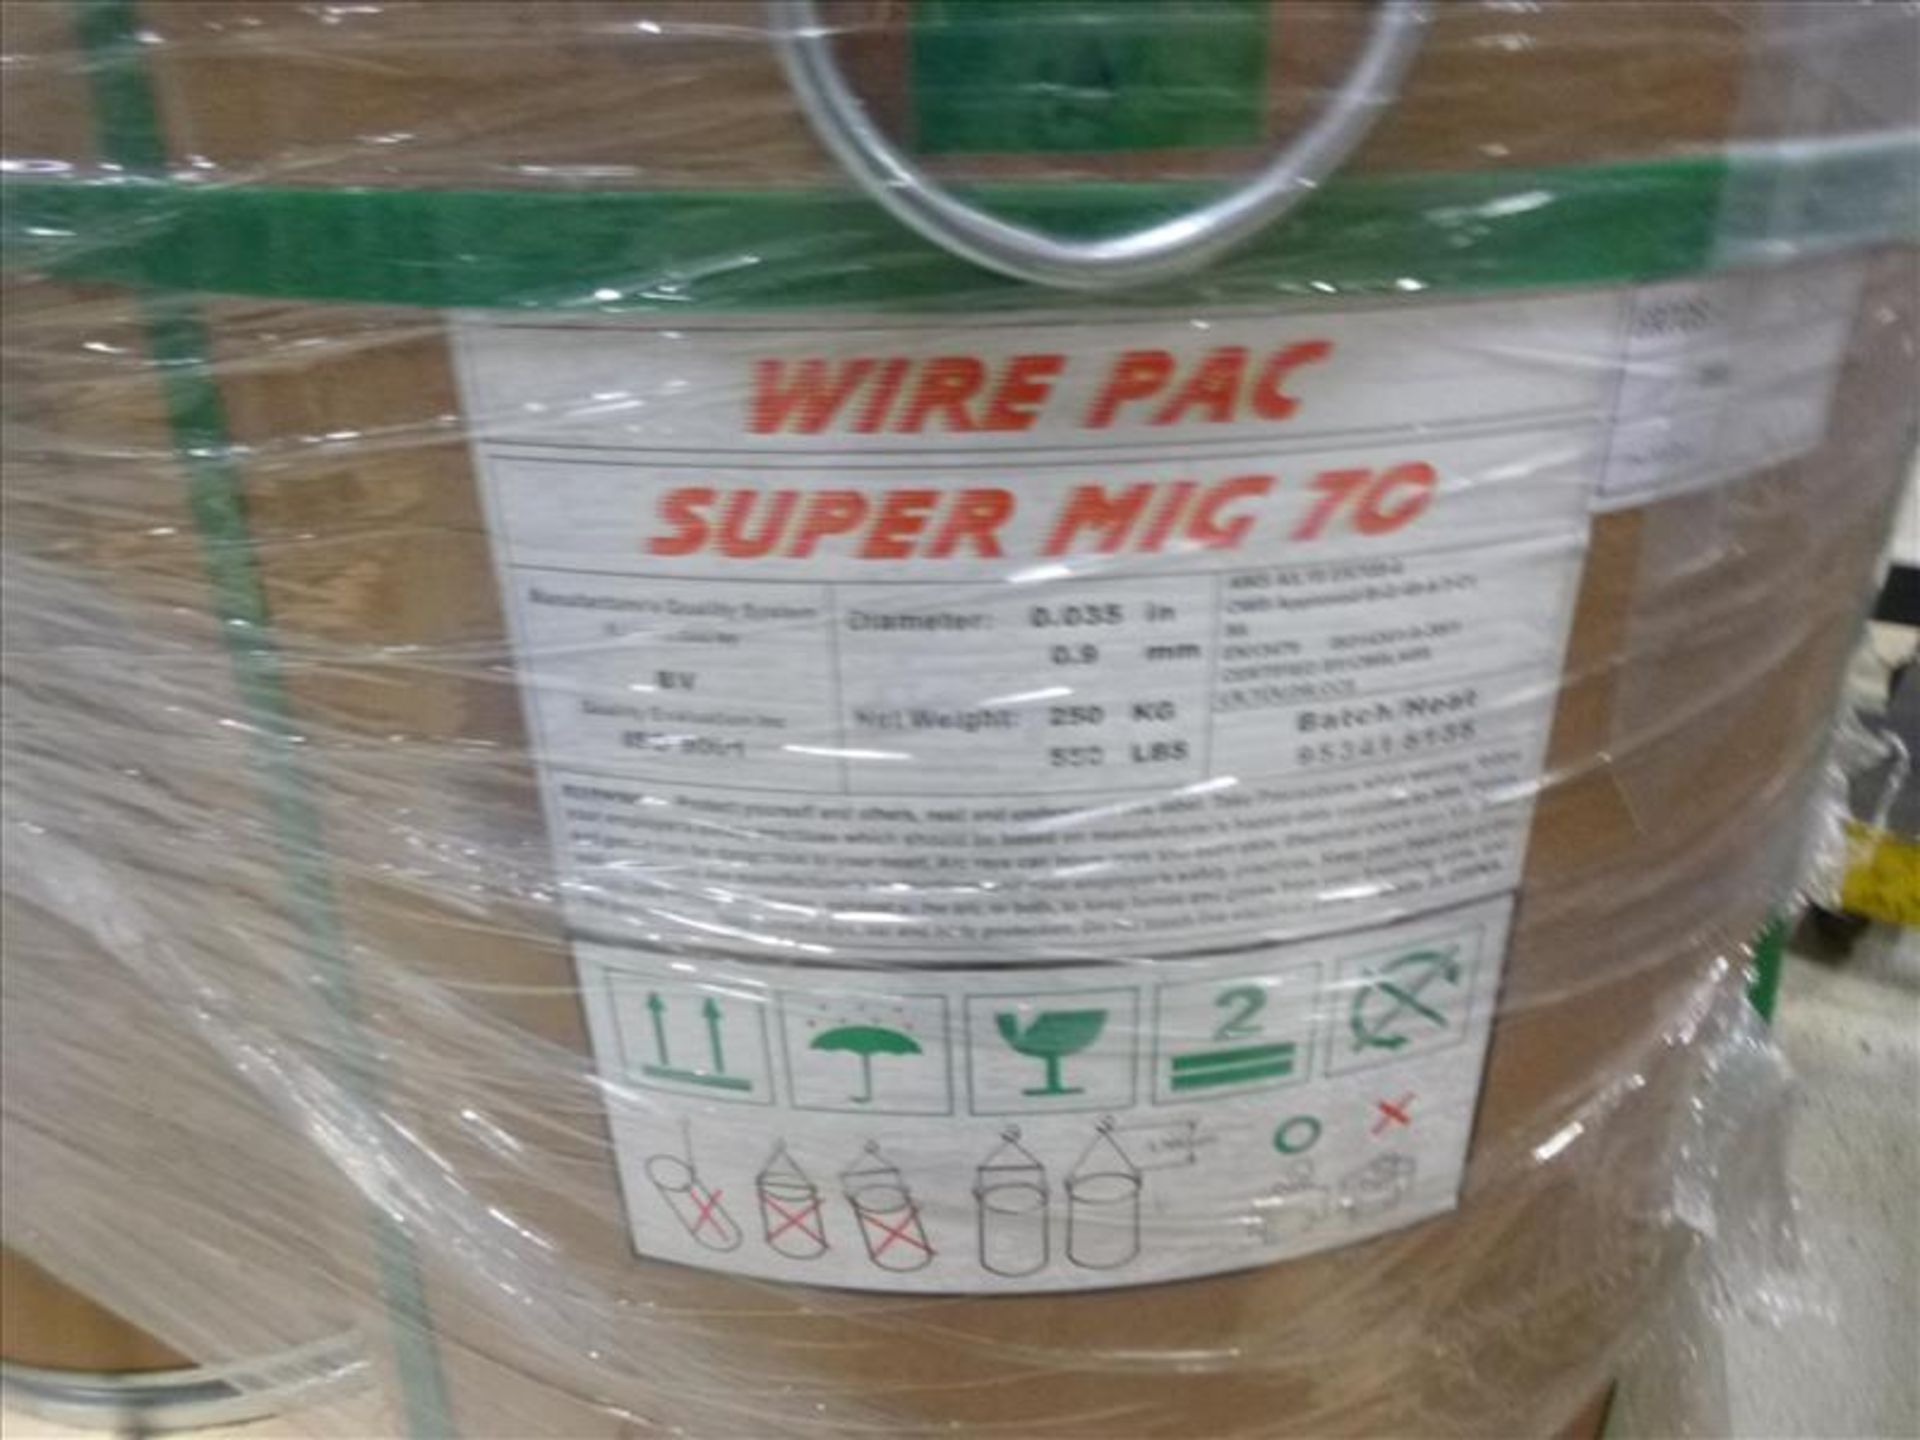 (4) WIREPAC SuperMIG70 Welding Wire Drums, 0.9 mm, 550 lbs. ea. (NEW) - Image 3 of 4